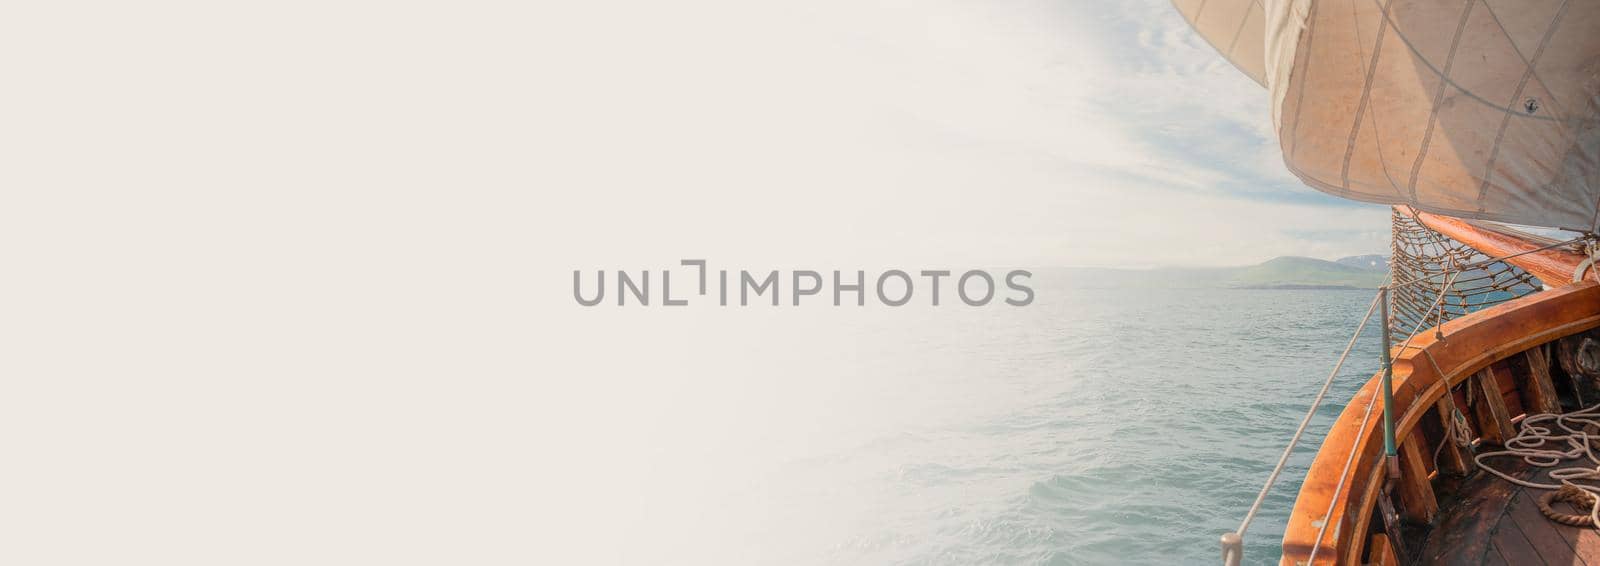 Banner with an old sailing boat towards dreams and adventures, with copy space for text. Concept travel, freedom and adventure, nomadic lifestyle